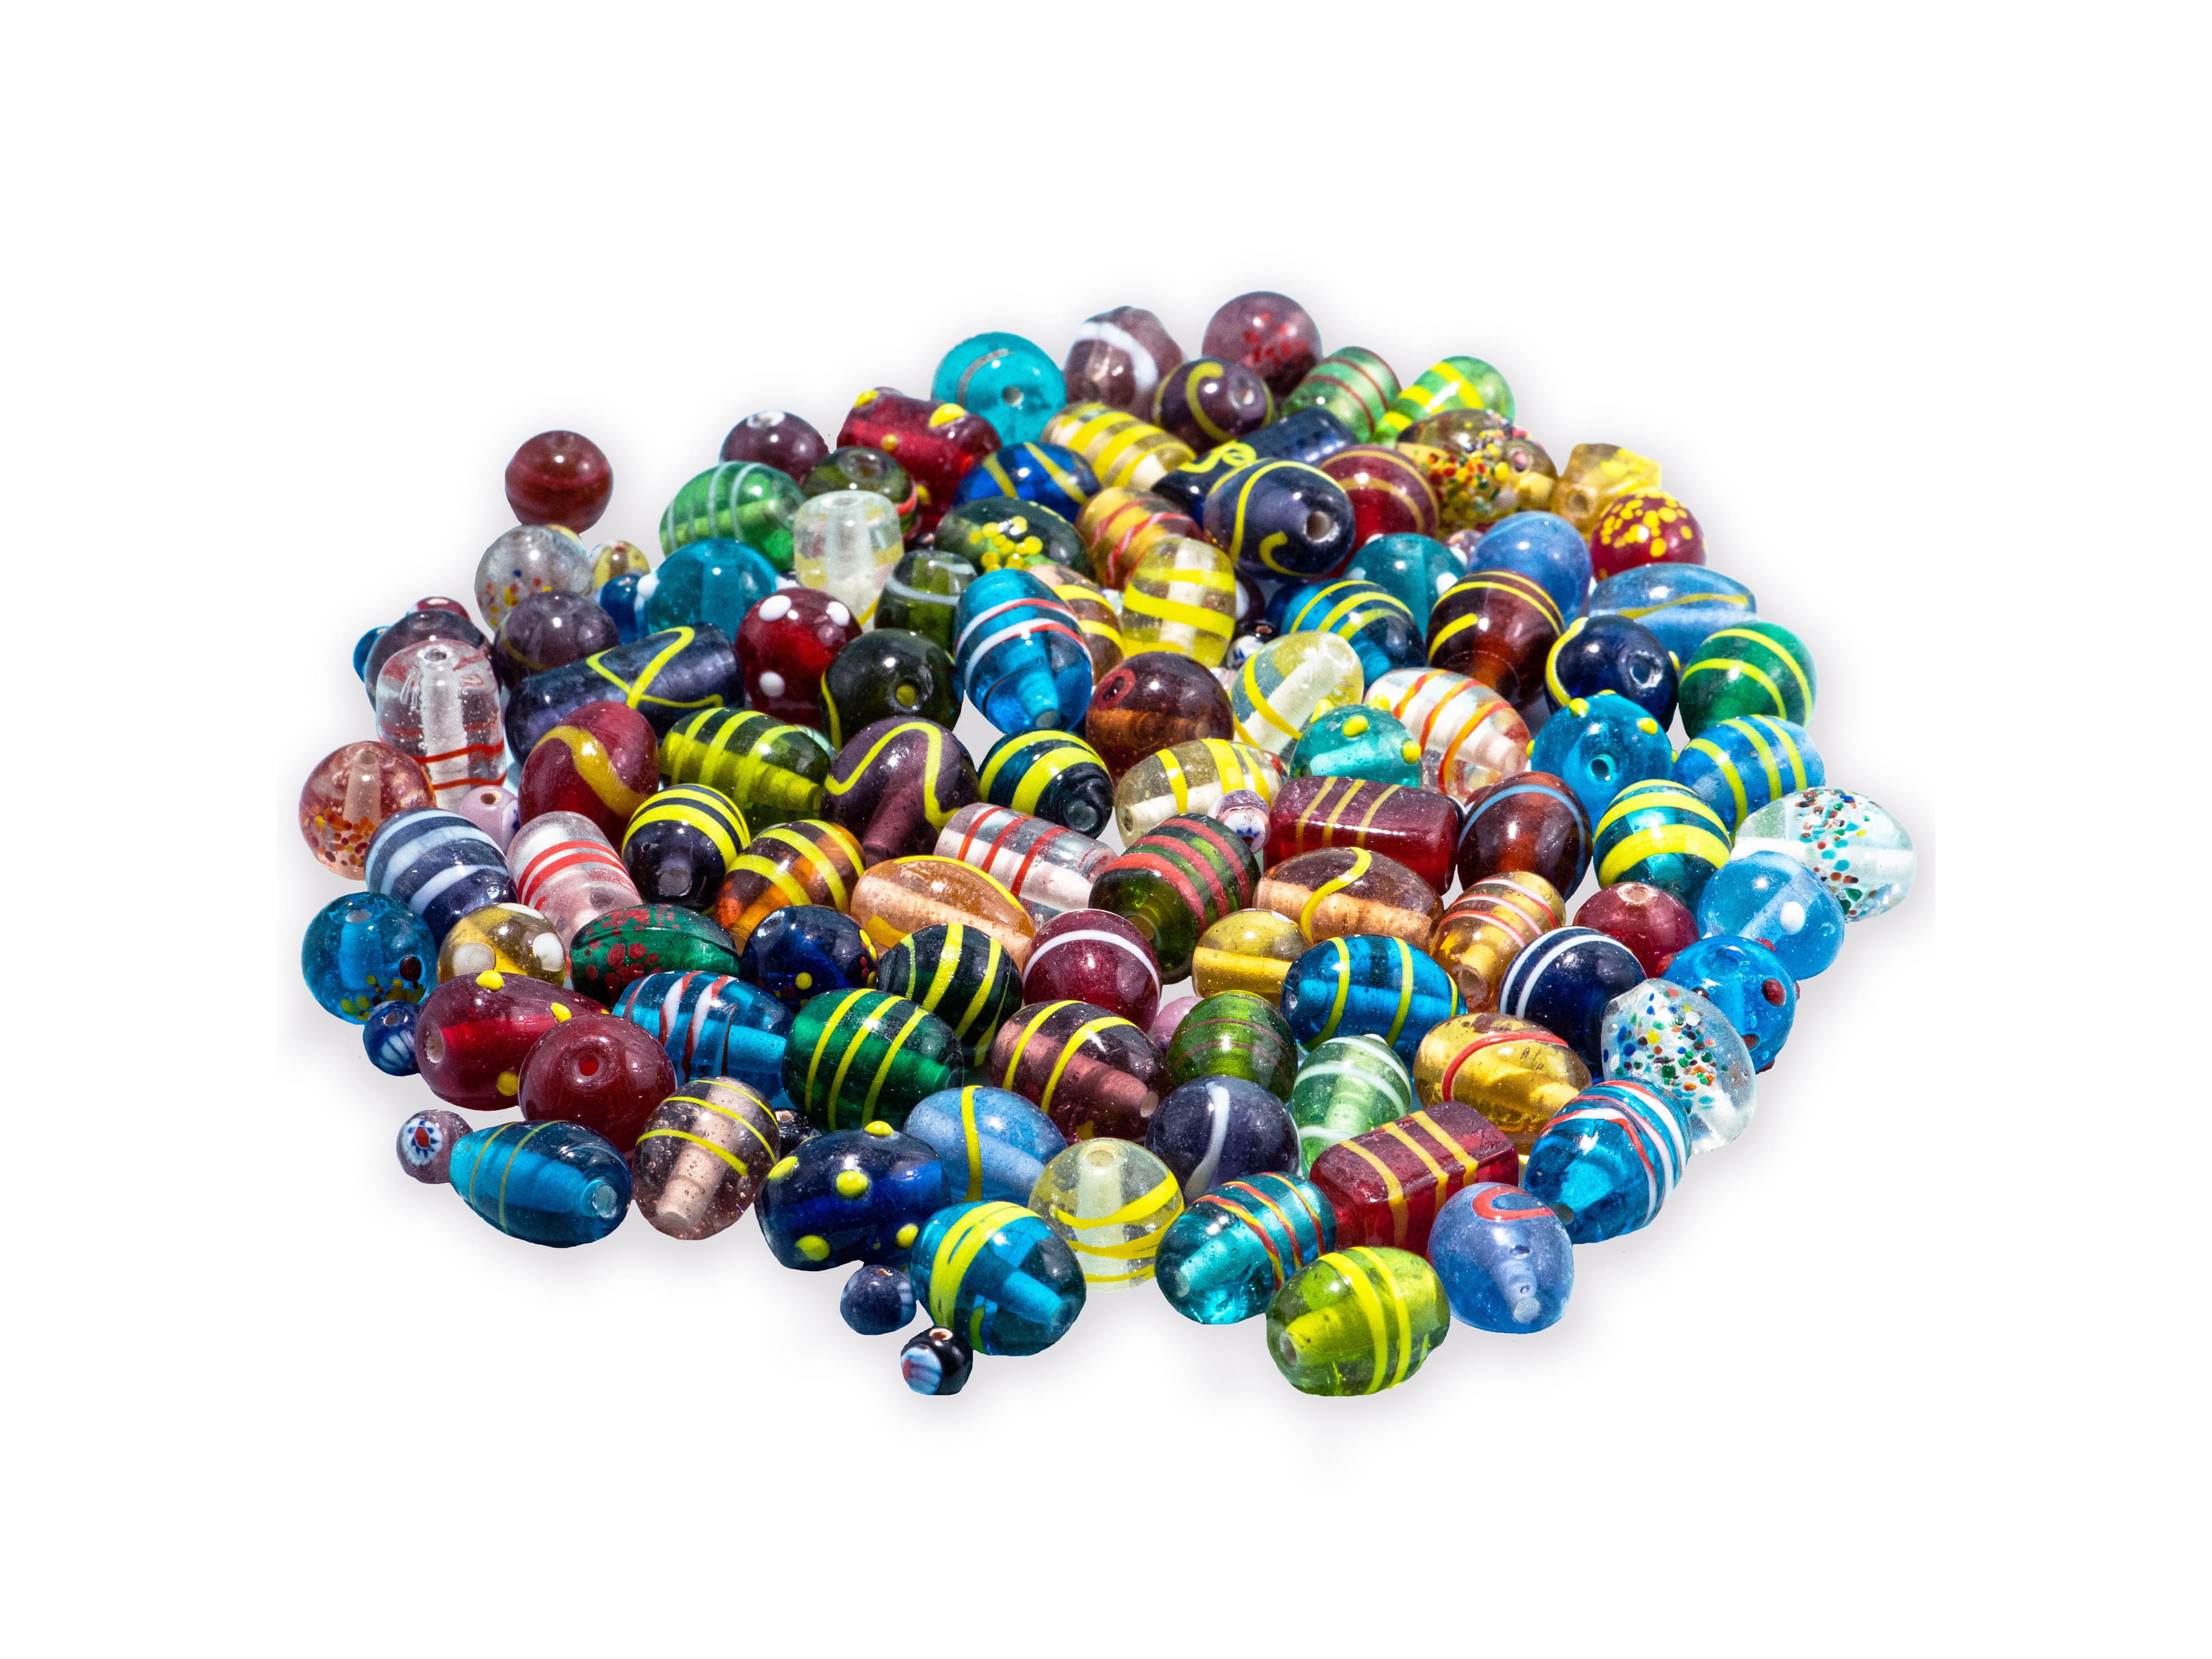 4mm,6mm,8mm,10mm,12mm Mixed Color Murano Evil Eye Glass Beads,Hand Made Lampwork Glass Beads,Charm Beads for DIY Jewelry Making Supply